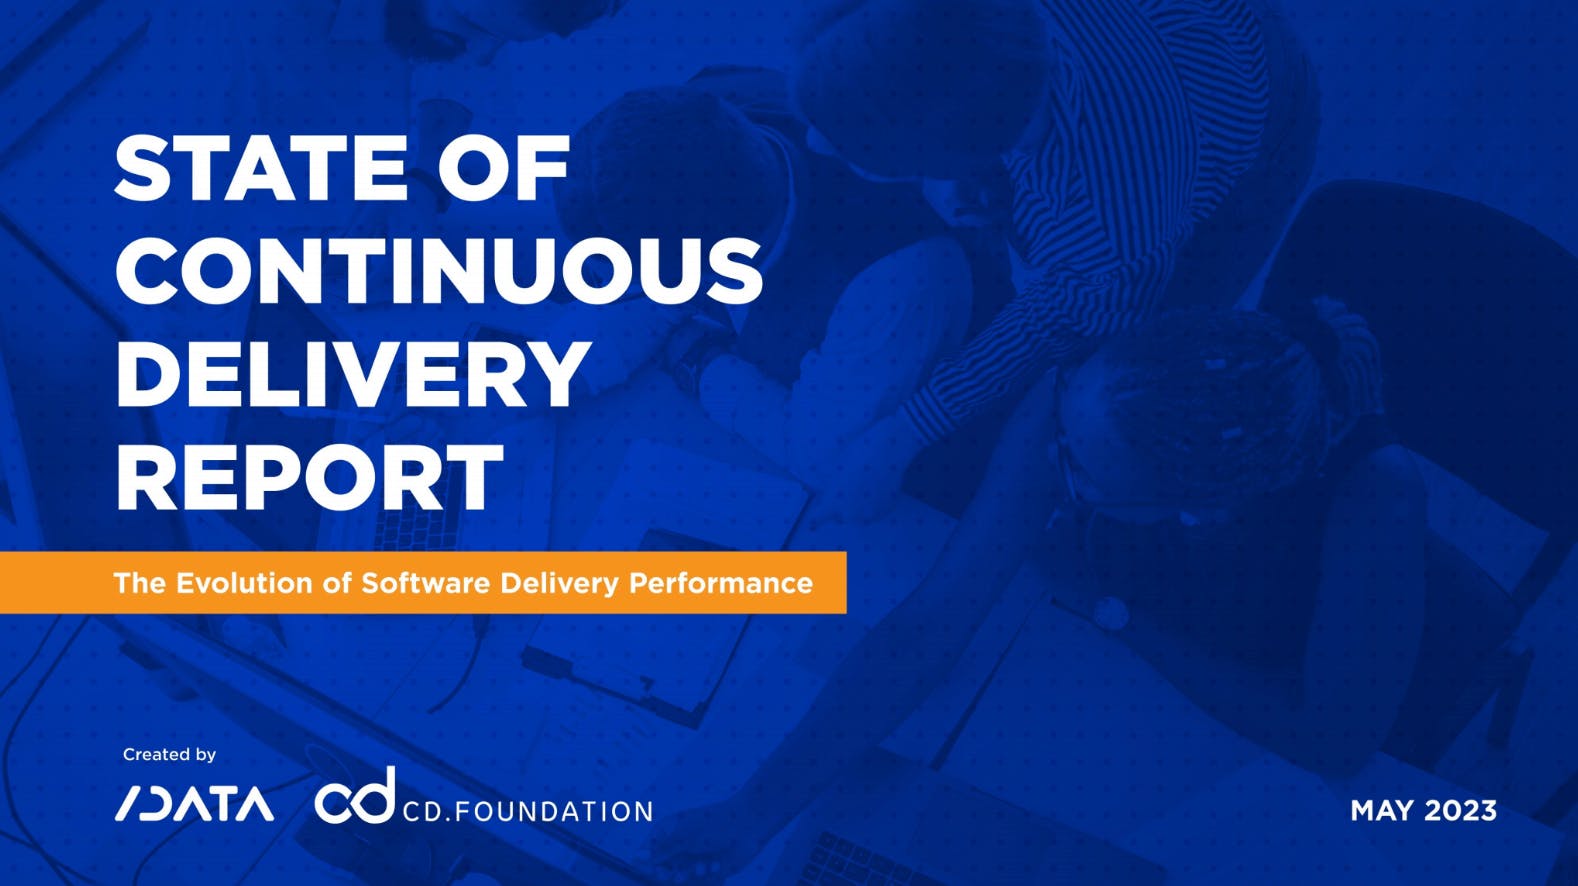 State of Continuous Delivery Report 2023: The Evolution of Software Delivery Performance